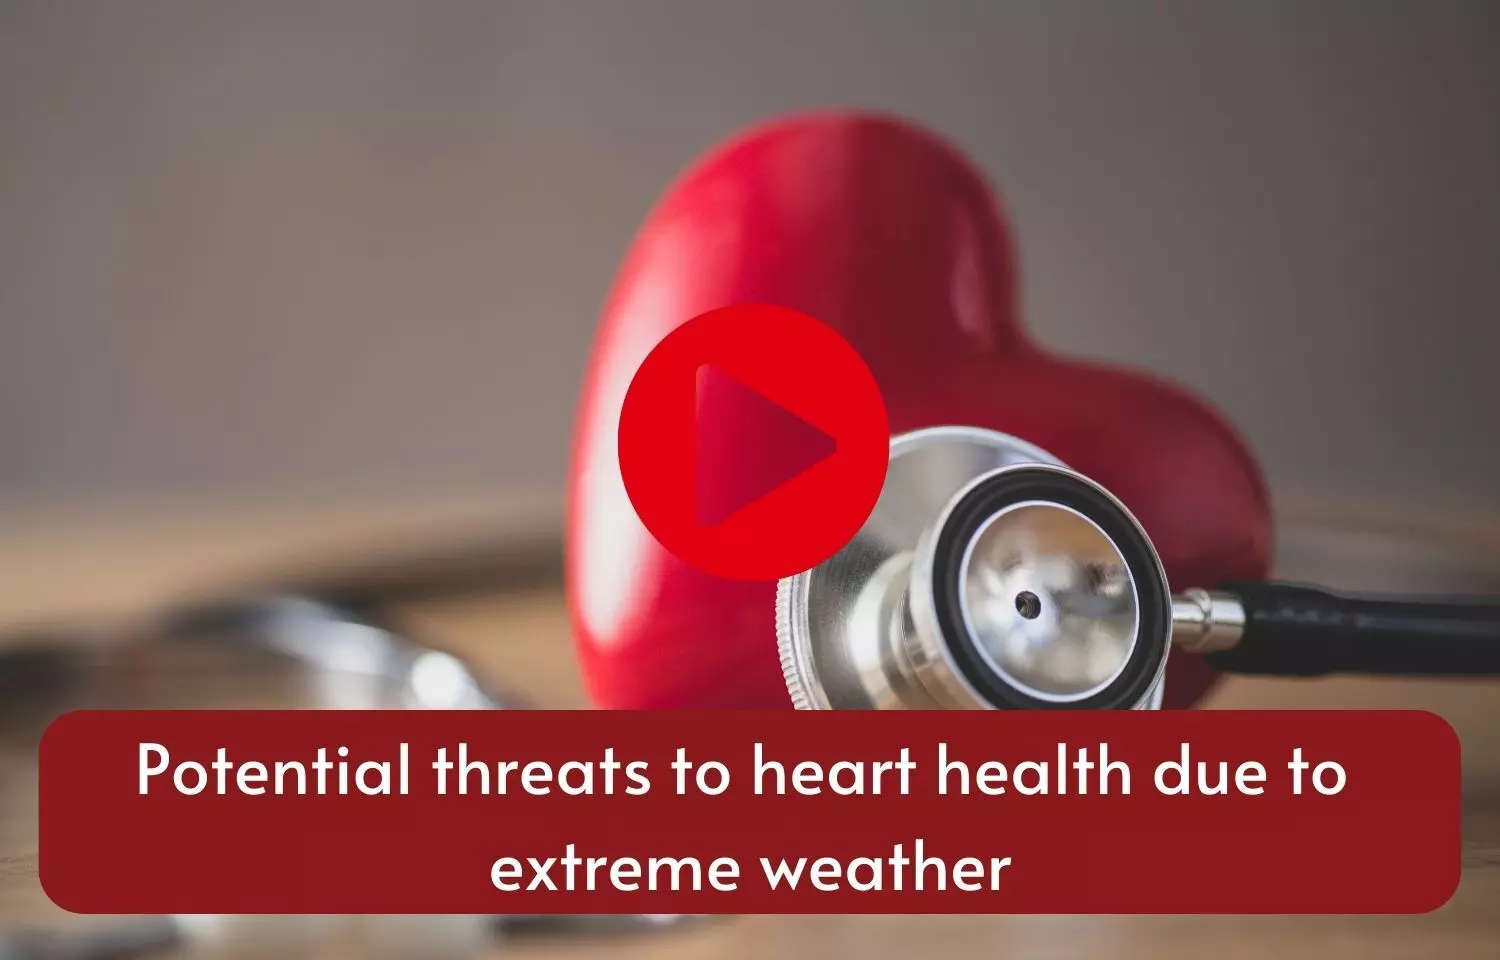 Potential threats to heart health due to extreme weather